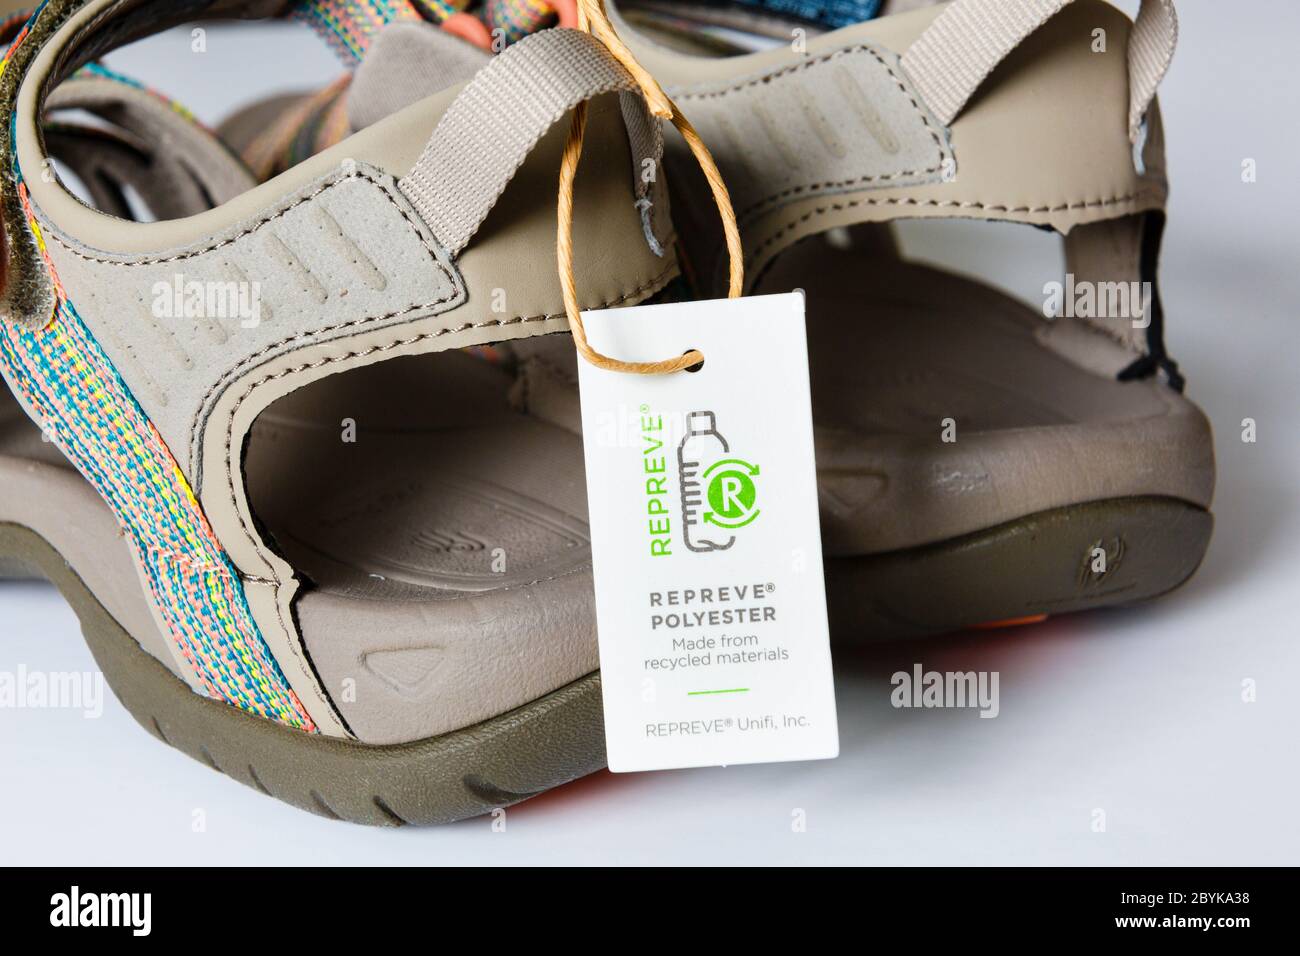 Close up of a label on a pair of sandals made from Repreve Polyester recycled plastic materials. England, UK, Britain Stock Photo